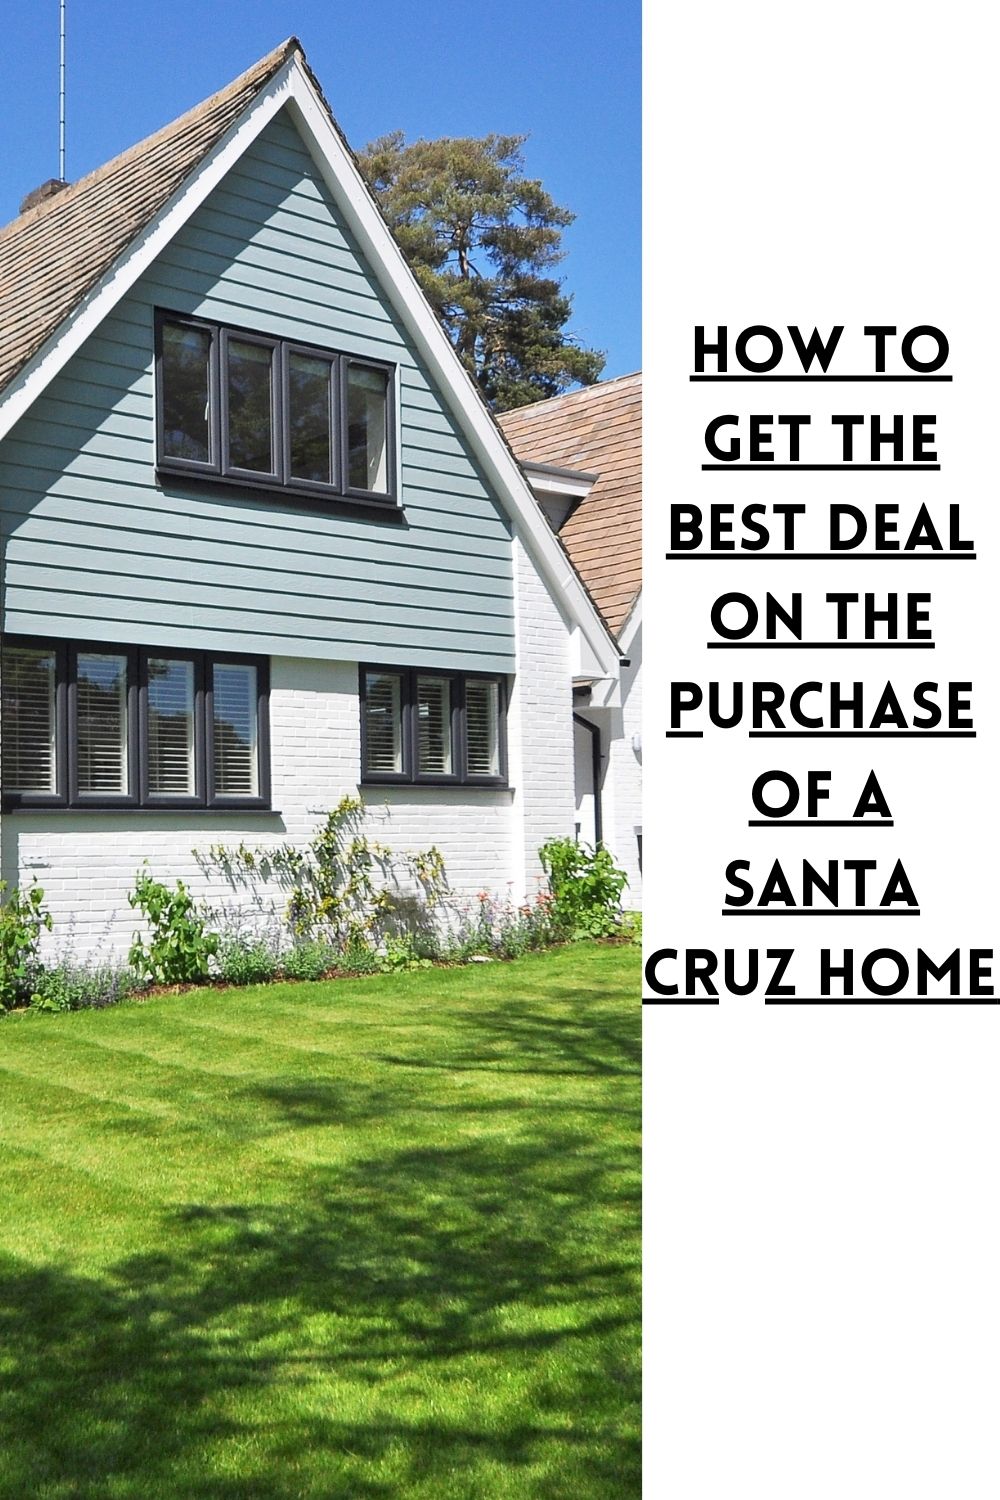 How to Get the Best Deal on the Purchase of a Santa Cruz Home